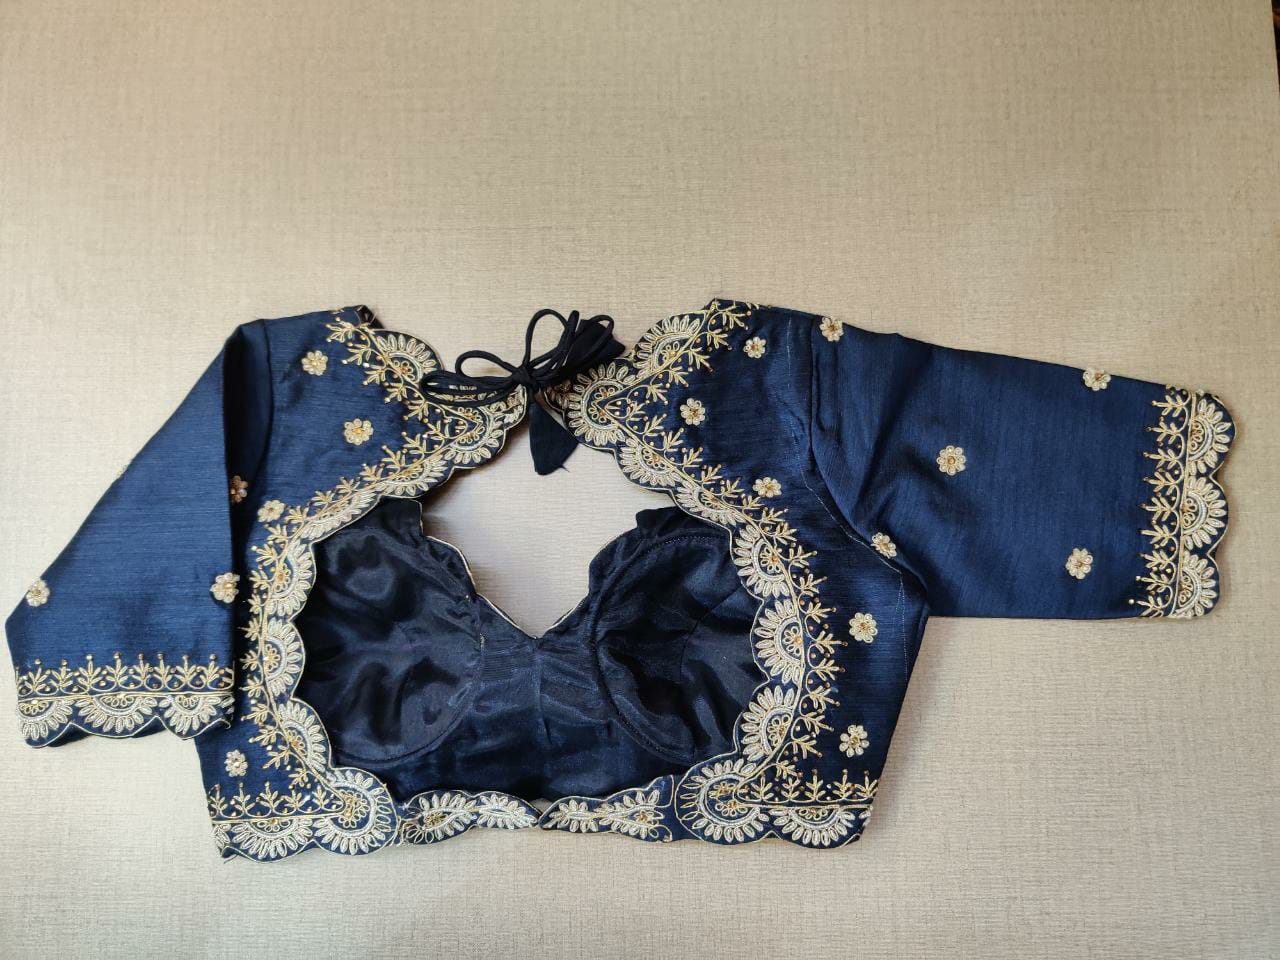 Buy beautiful dark blue embroidered saree blouse online in USA. Elevate your Indian ethnic saree looks with beautiful readymade saree blouse, embroidered saree blouses, Banarasi saree blouse, designer sari blouses, sleeveless saree blouses from Pure Elegance Indian fashion store in USA.-back